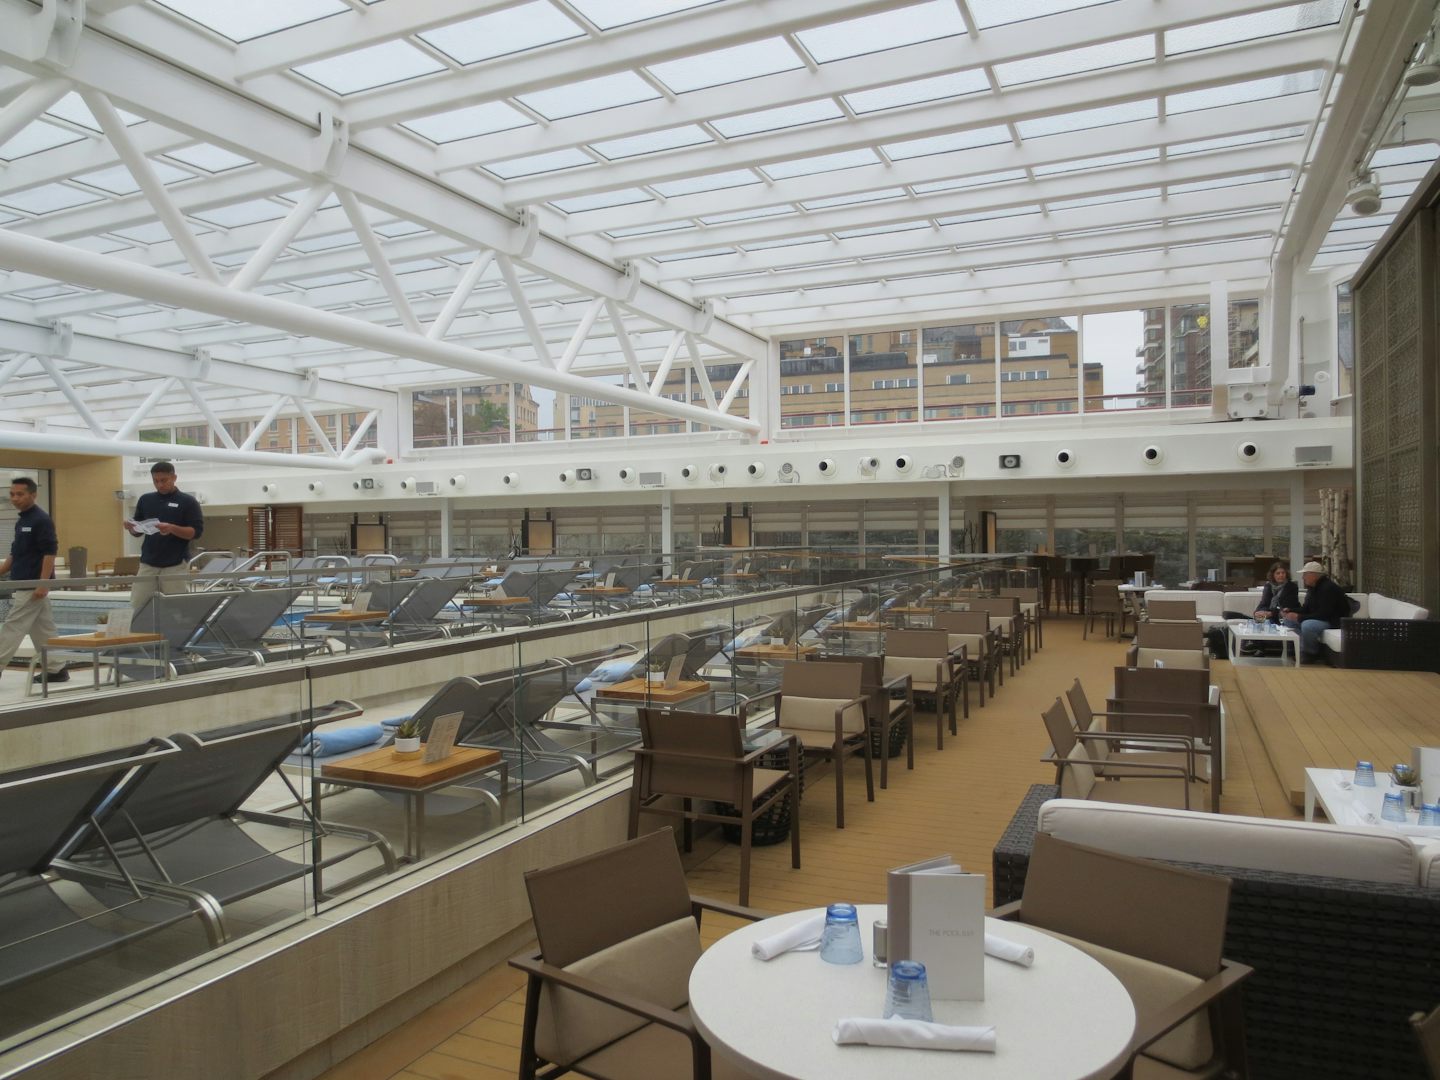 Viking Star Roof opens and closes!